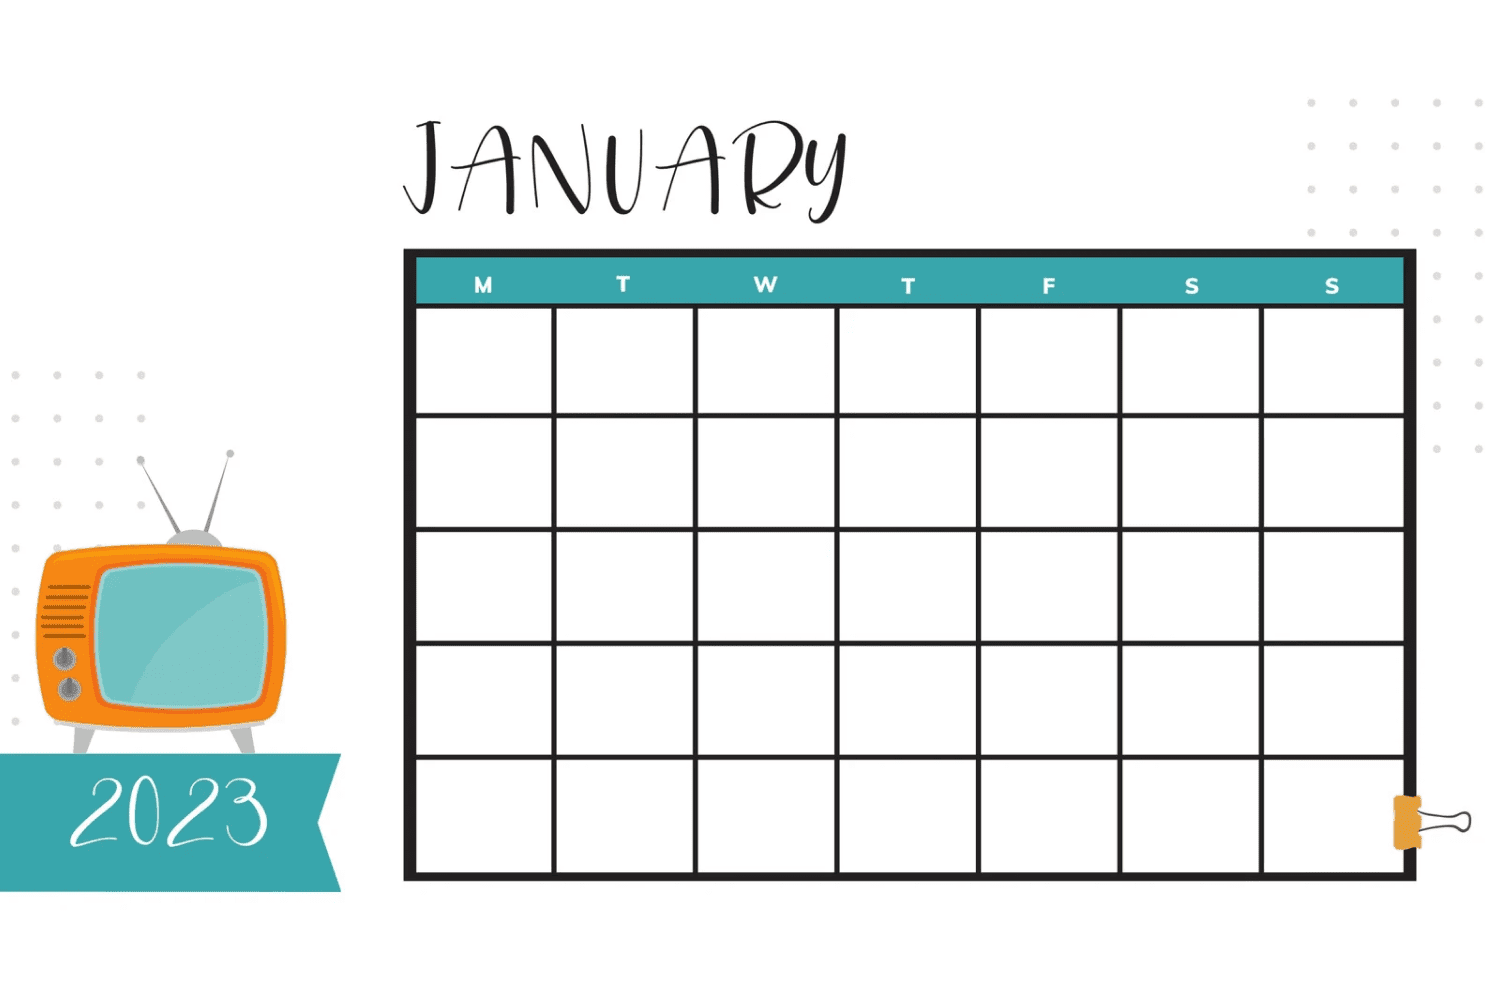 Calendar for january in a minimalist style with a drawn vintage tv.